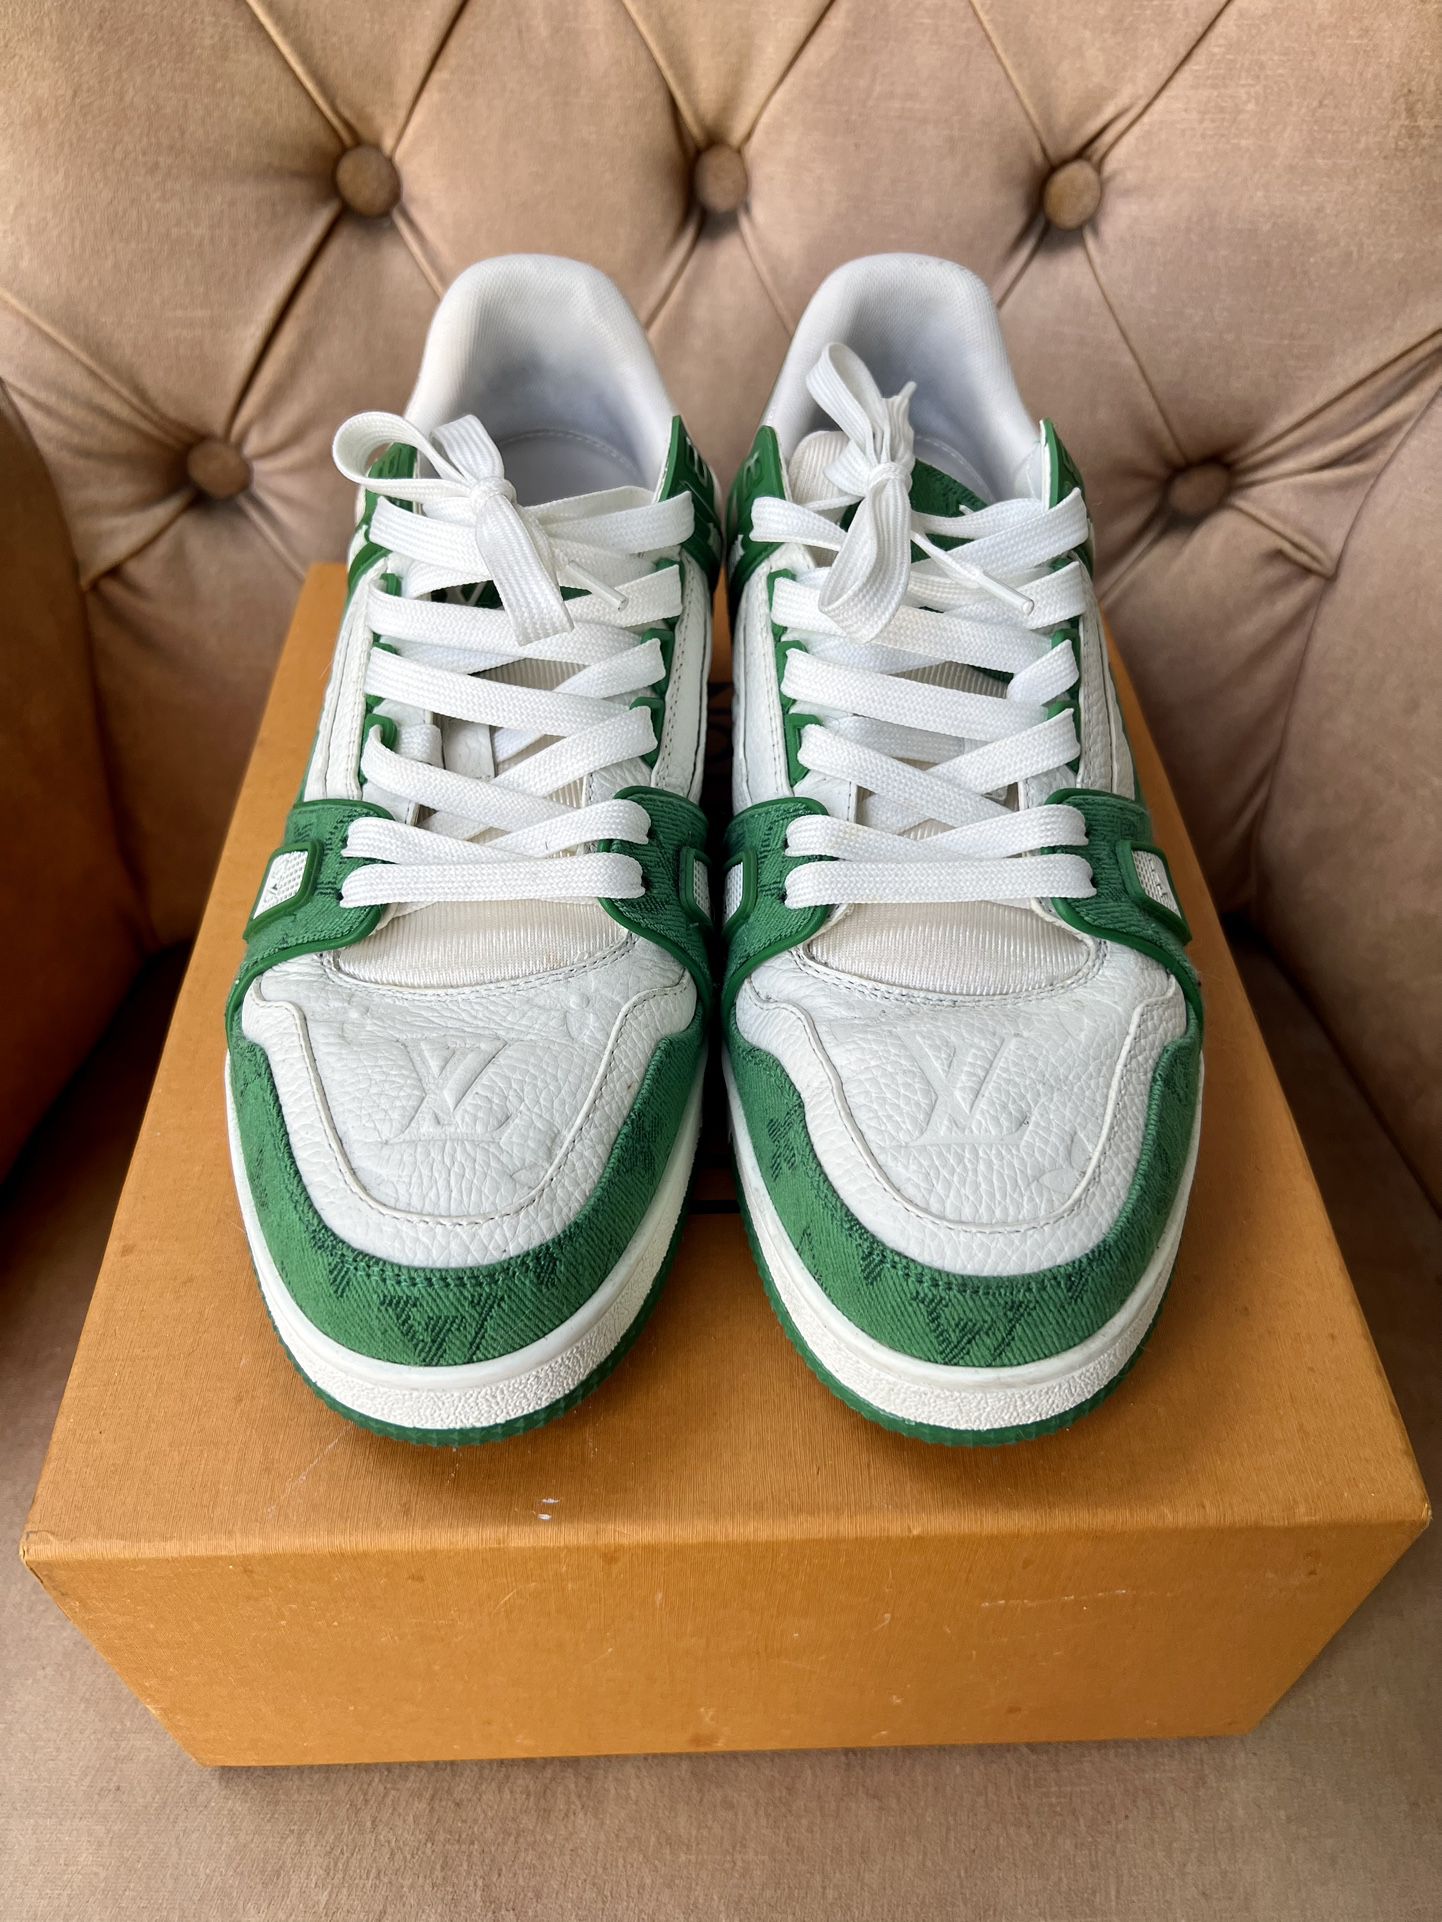 Louis Vuitton Trainer Sneaker Green for Sale in Los Angeles, CA